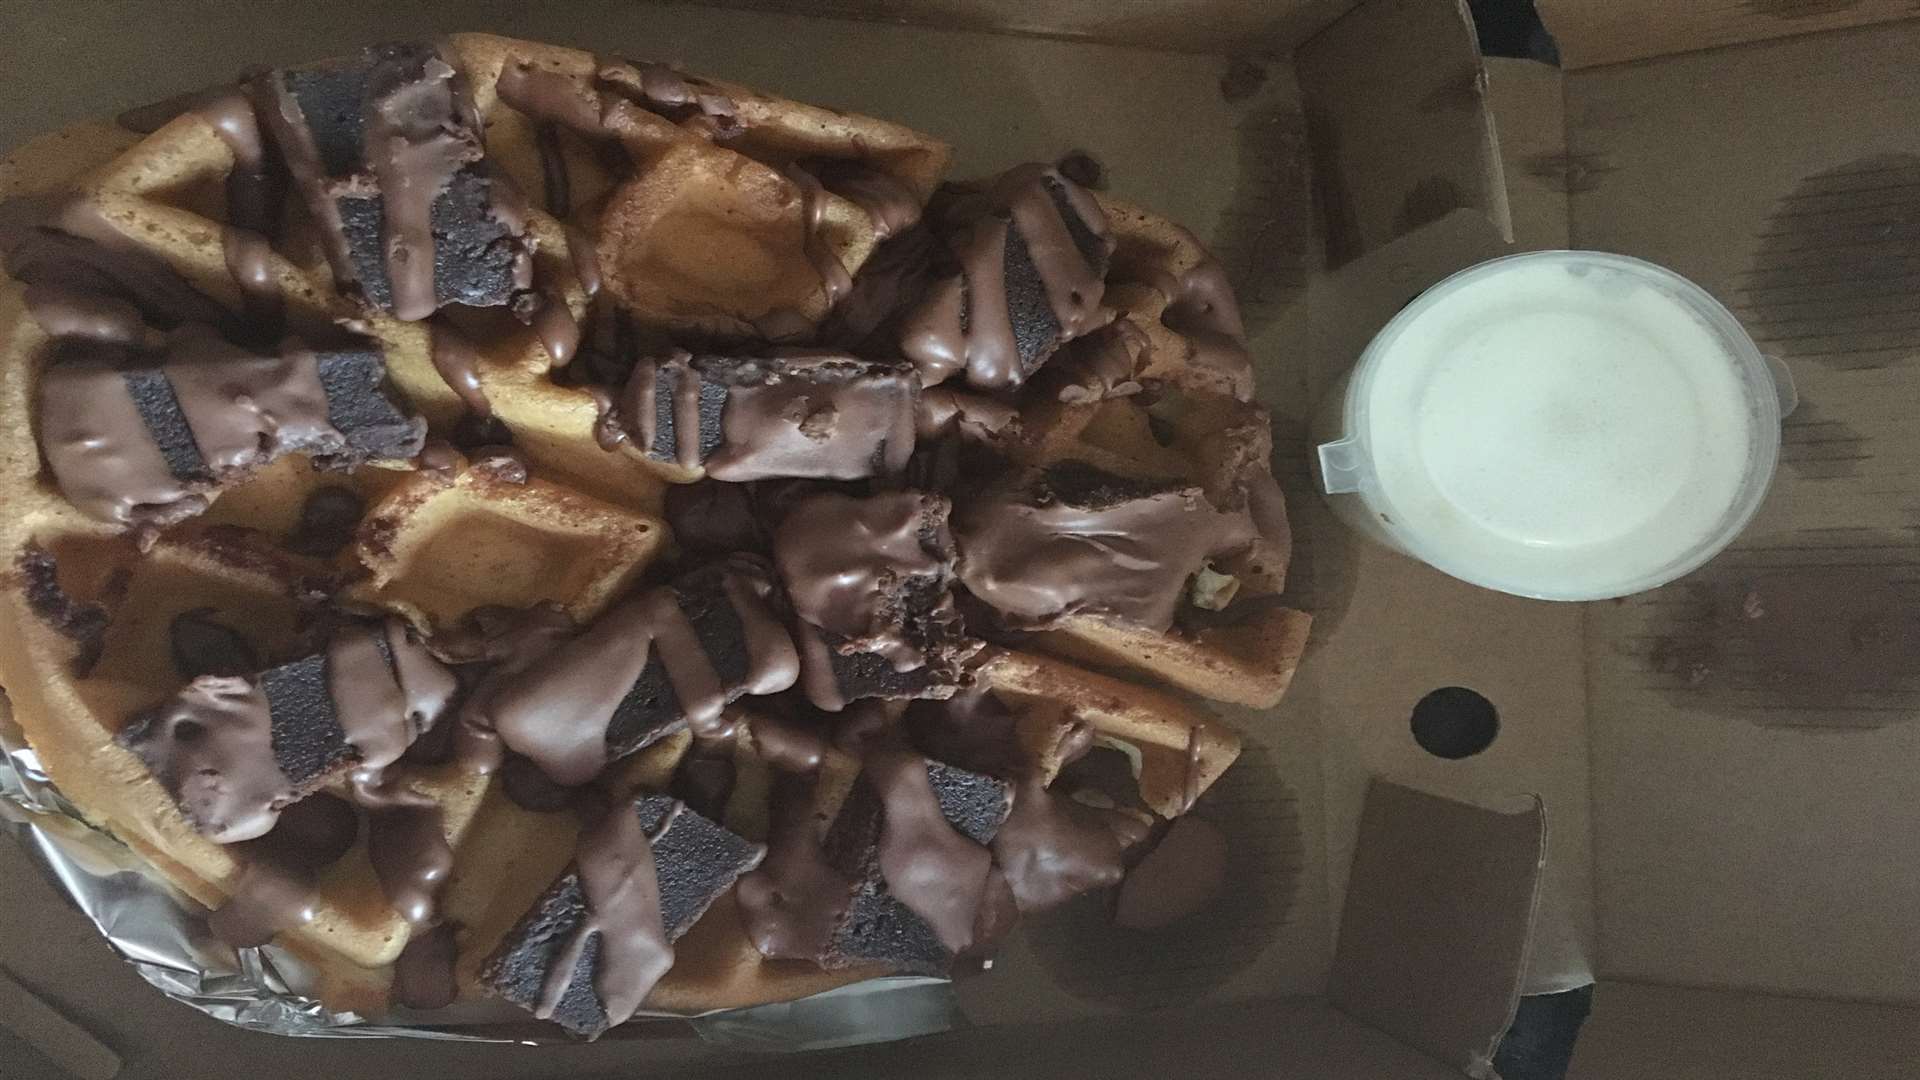 The chocolate fudge brownie waffle, which had toppings missing